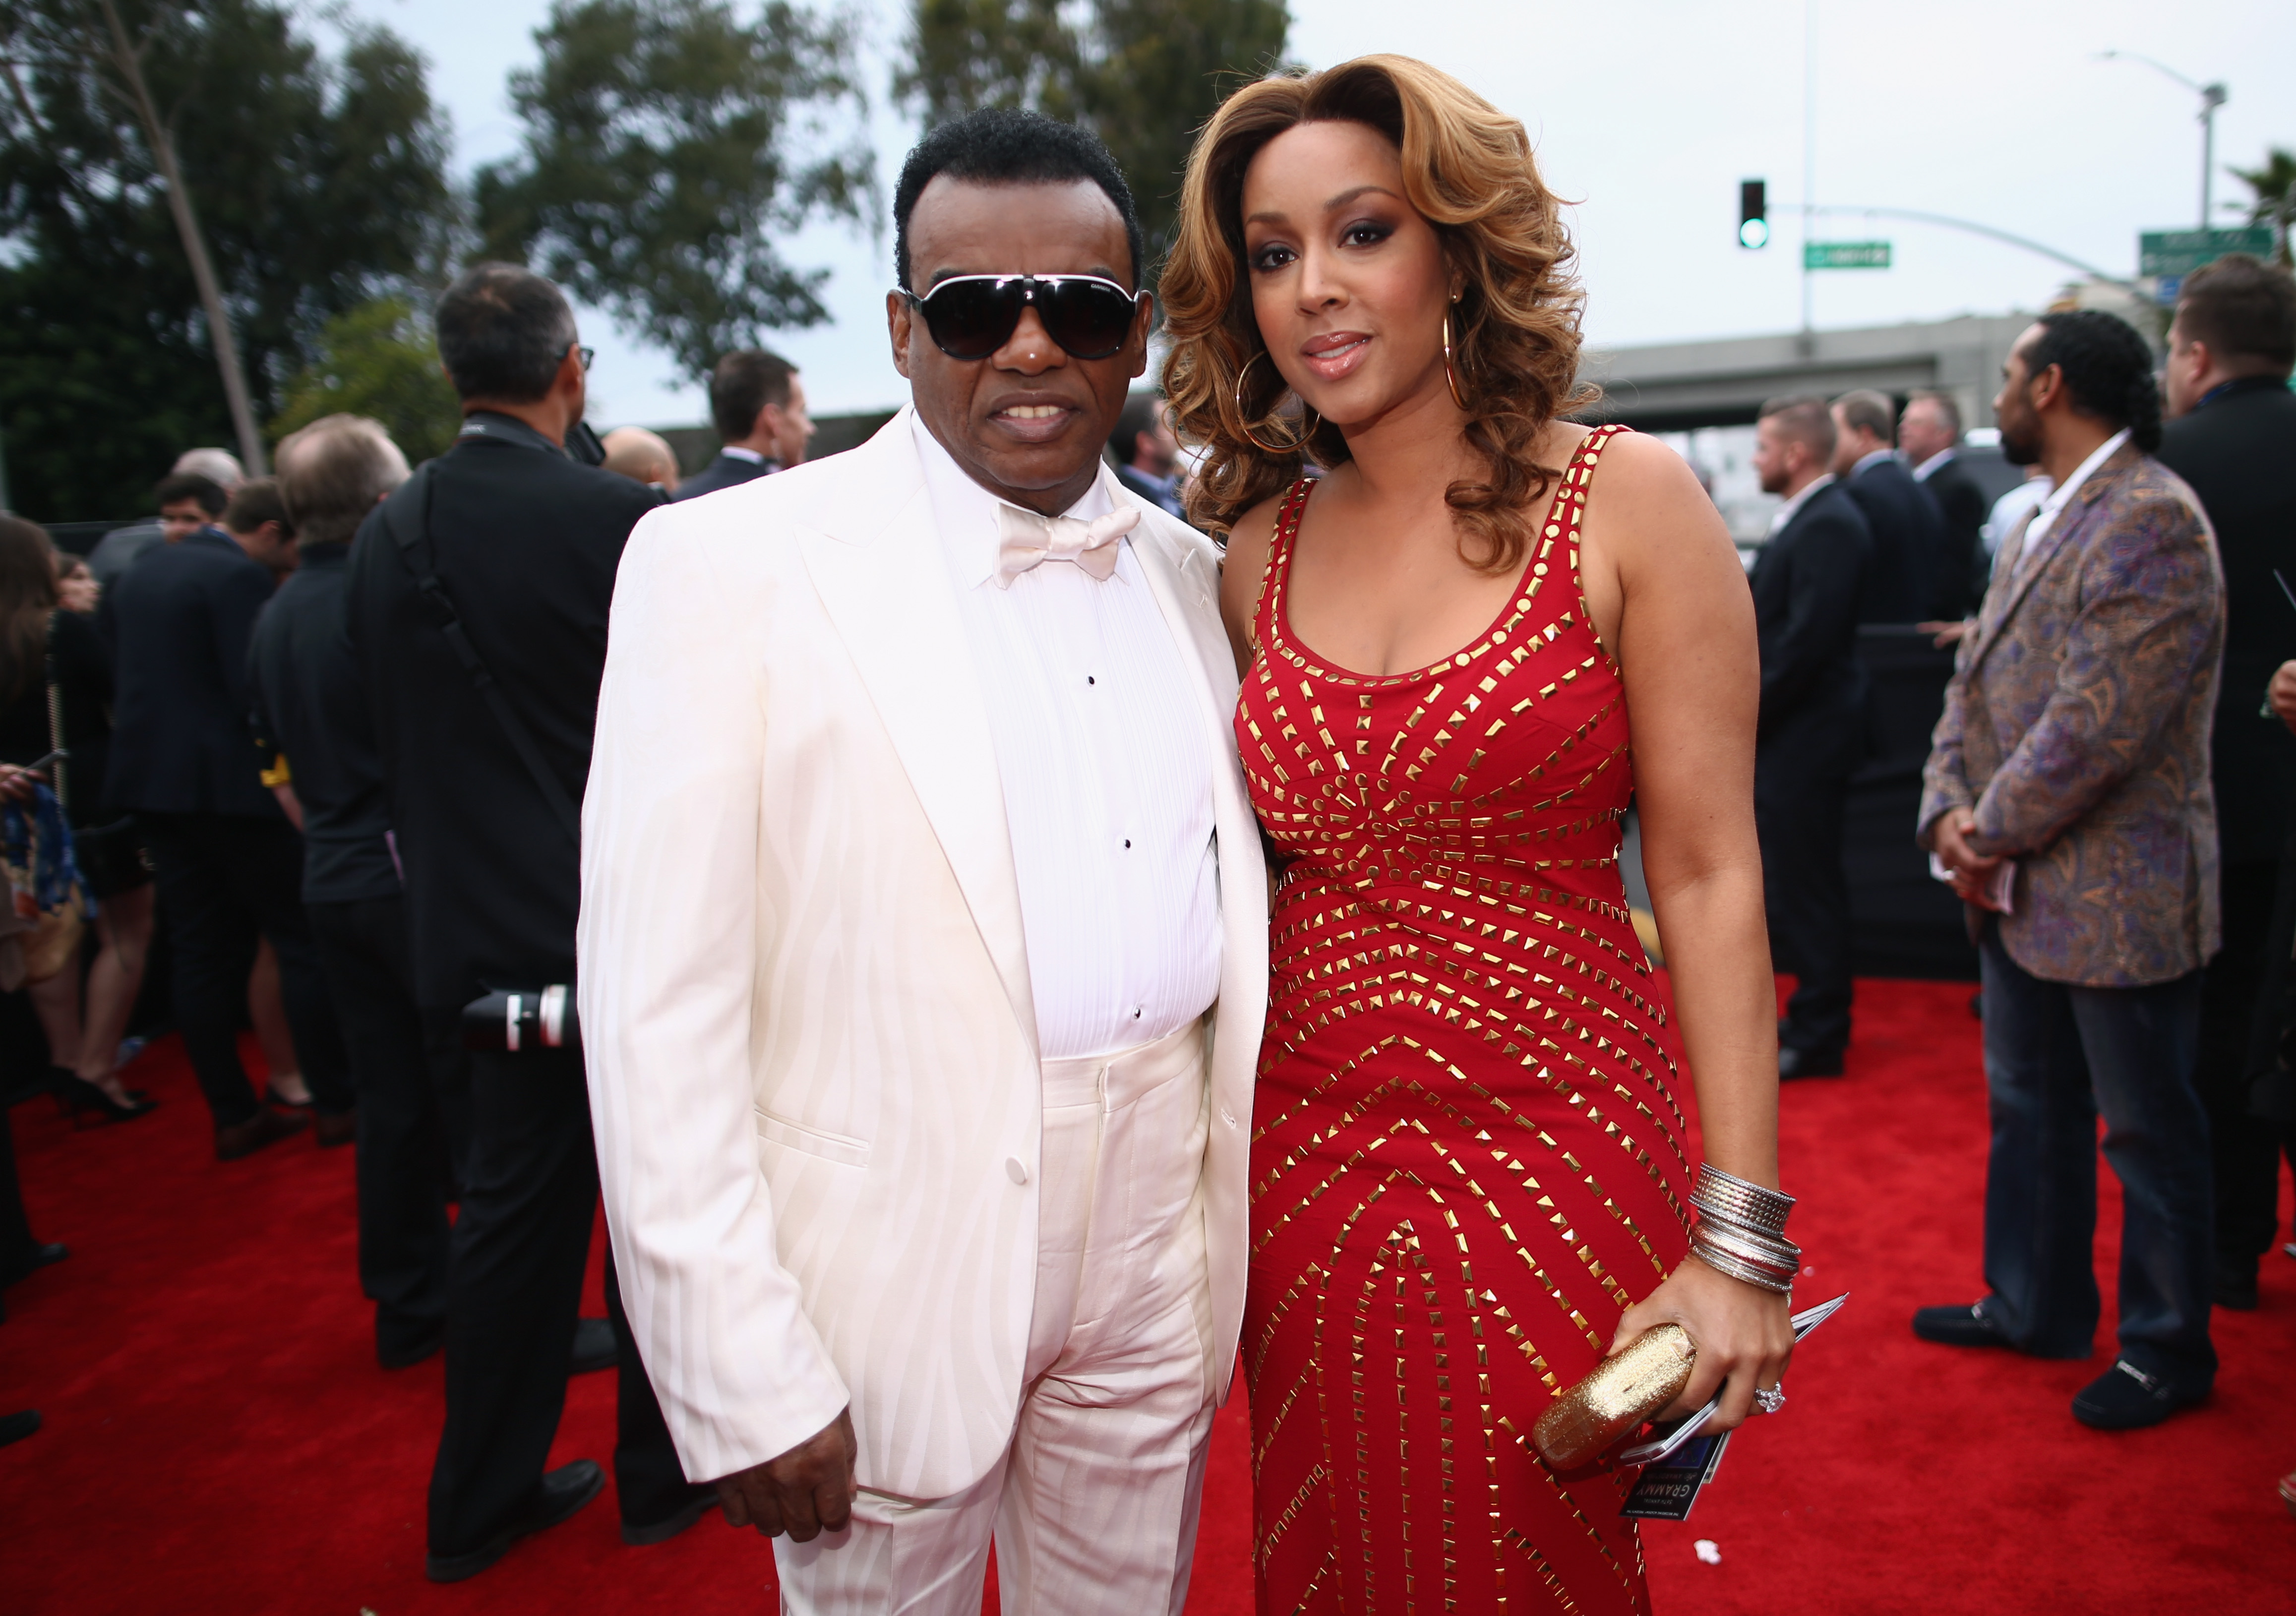 Ronald Isley and Kandy Johnson Isley attend the 56th GRAMMY Awards at Staples Center on January 26, 2014, in Los Angeles, California. | Source: Getty Images